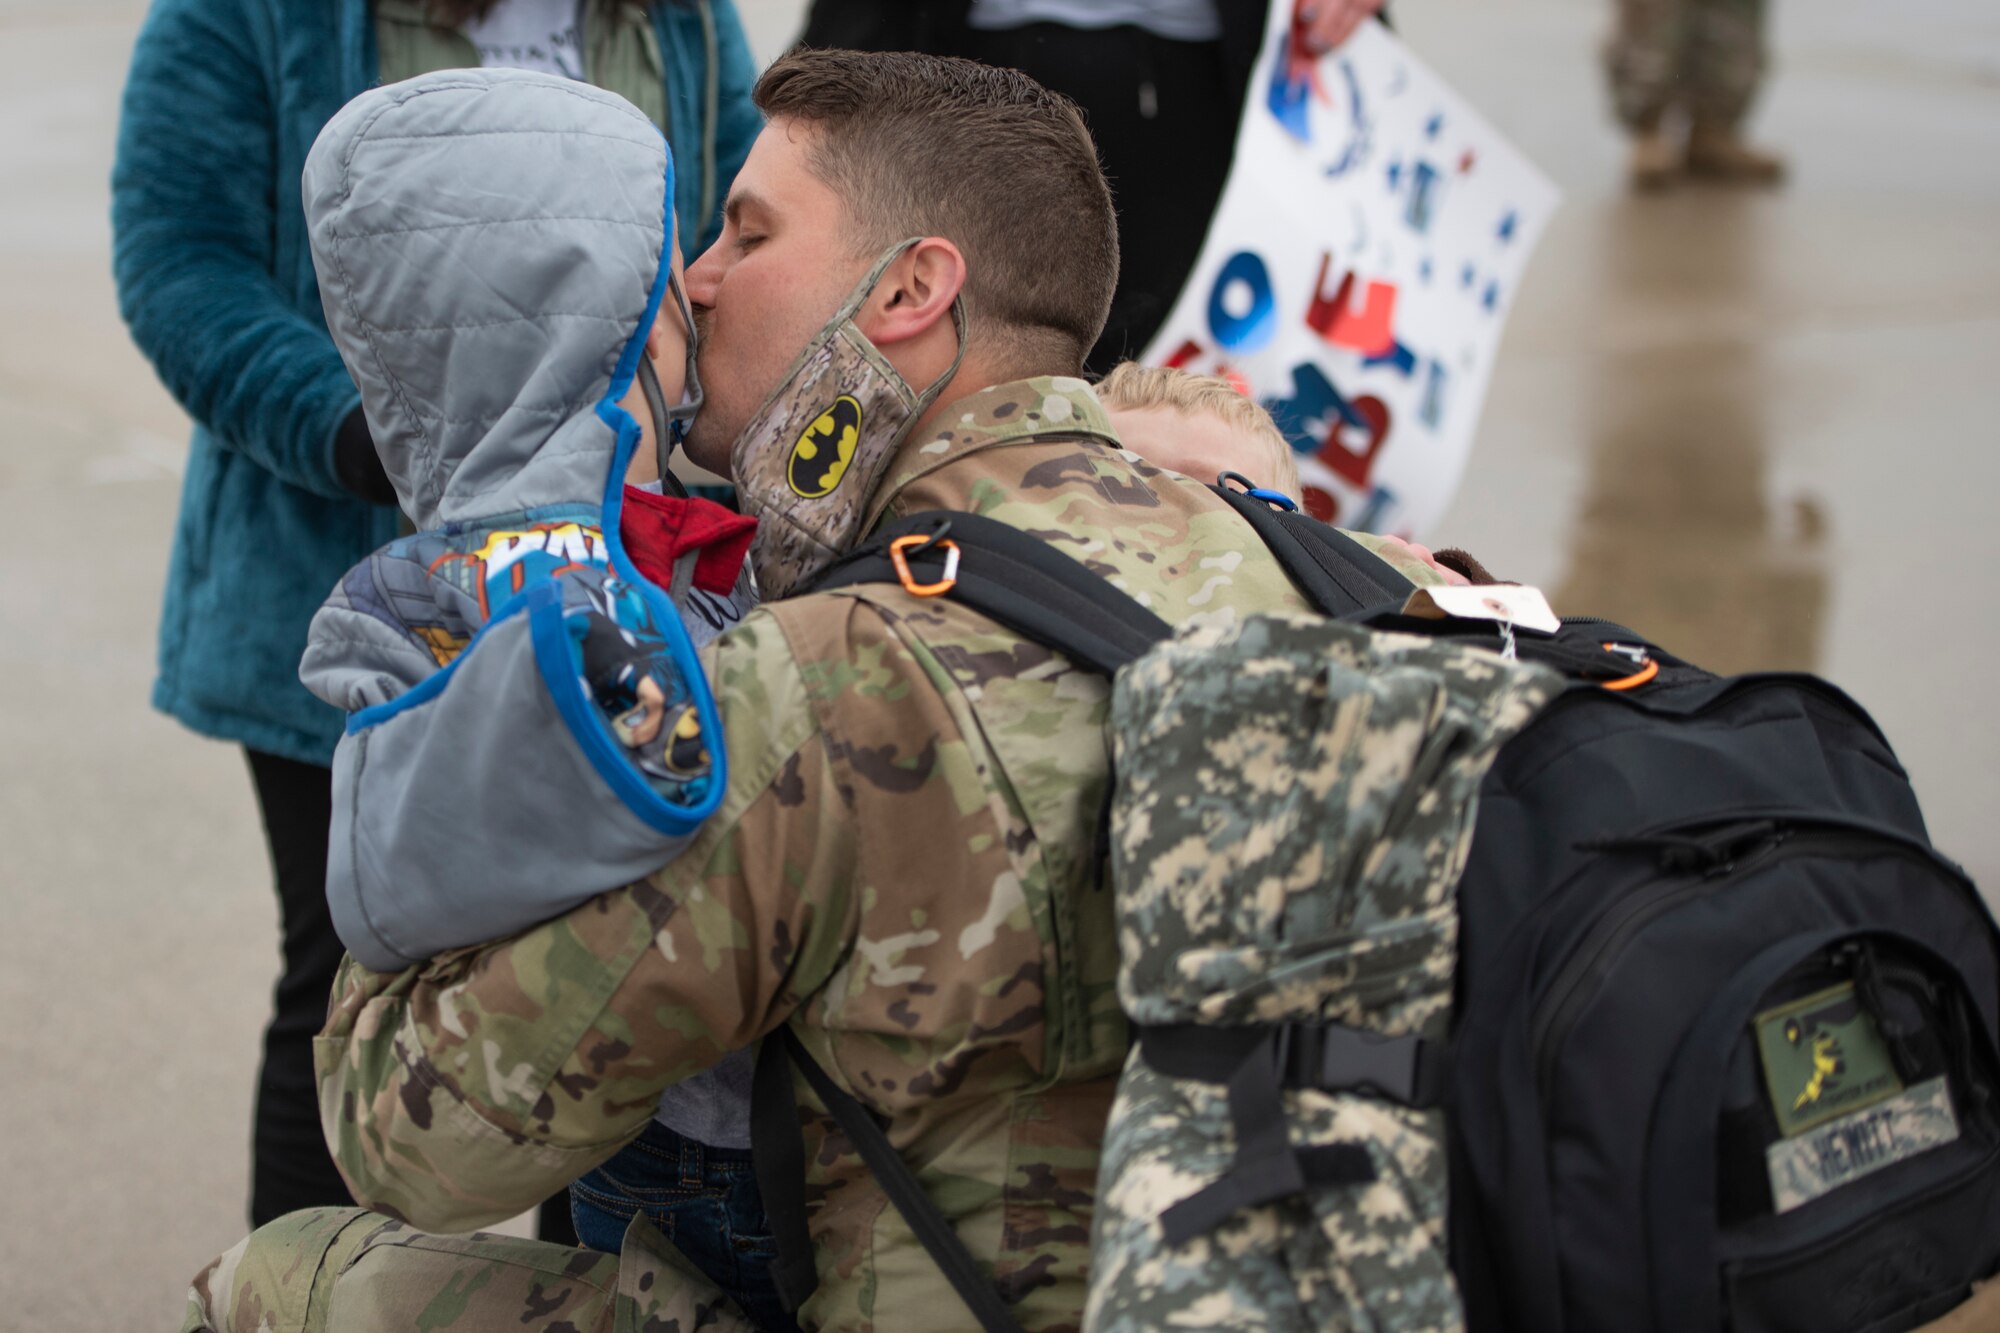 A U.S. Airman, assigned to the Ohio National Guard’s 180th Fighter Wing, embraces a loved one after returning home from an overseas deployment, Jan. 26, 2020 at the 180FW in Swanton, Ohio.